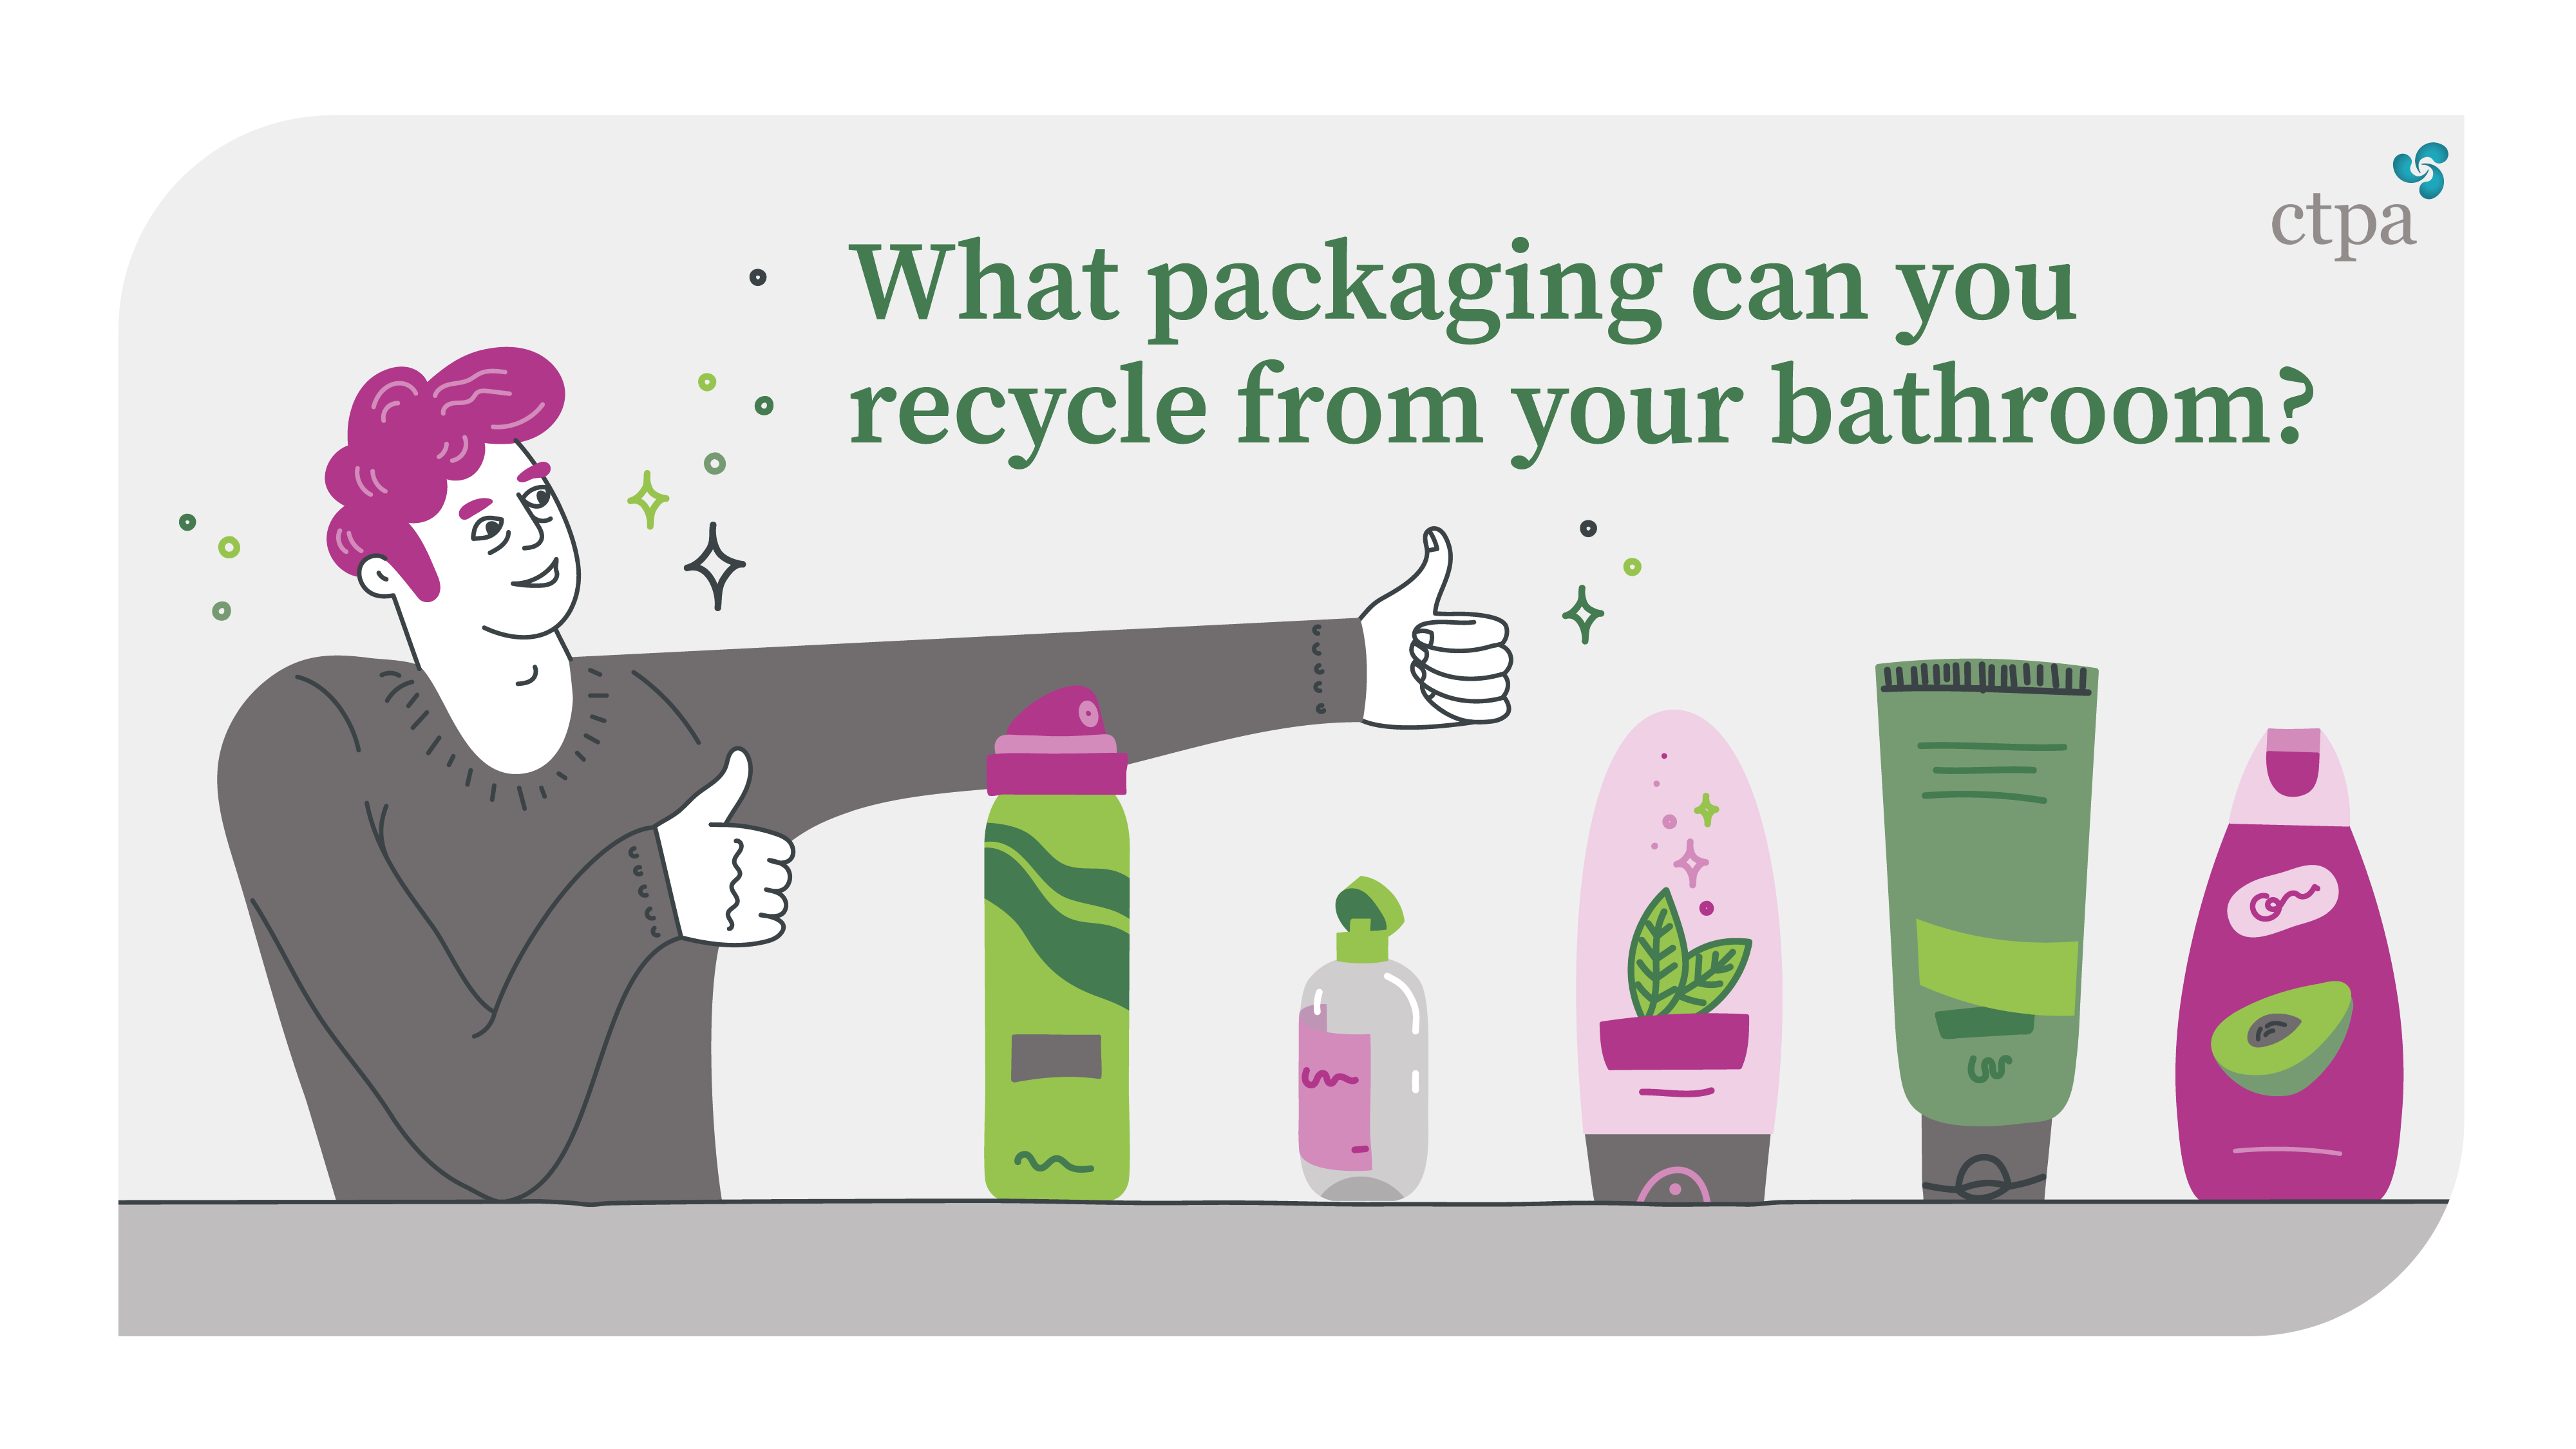 What packaging can you recycle from your bathroom?